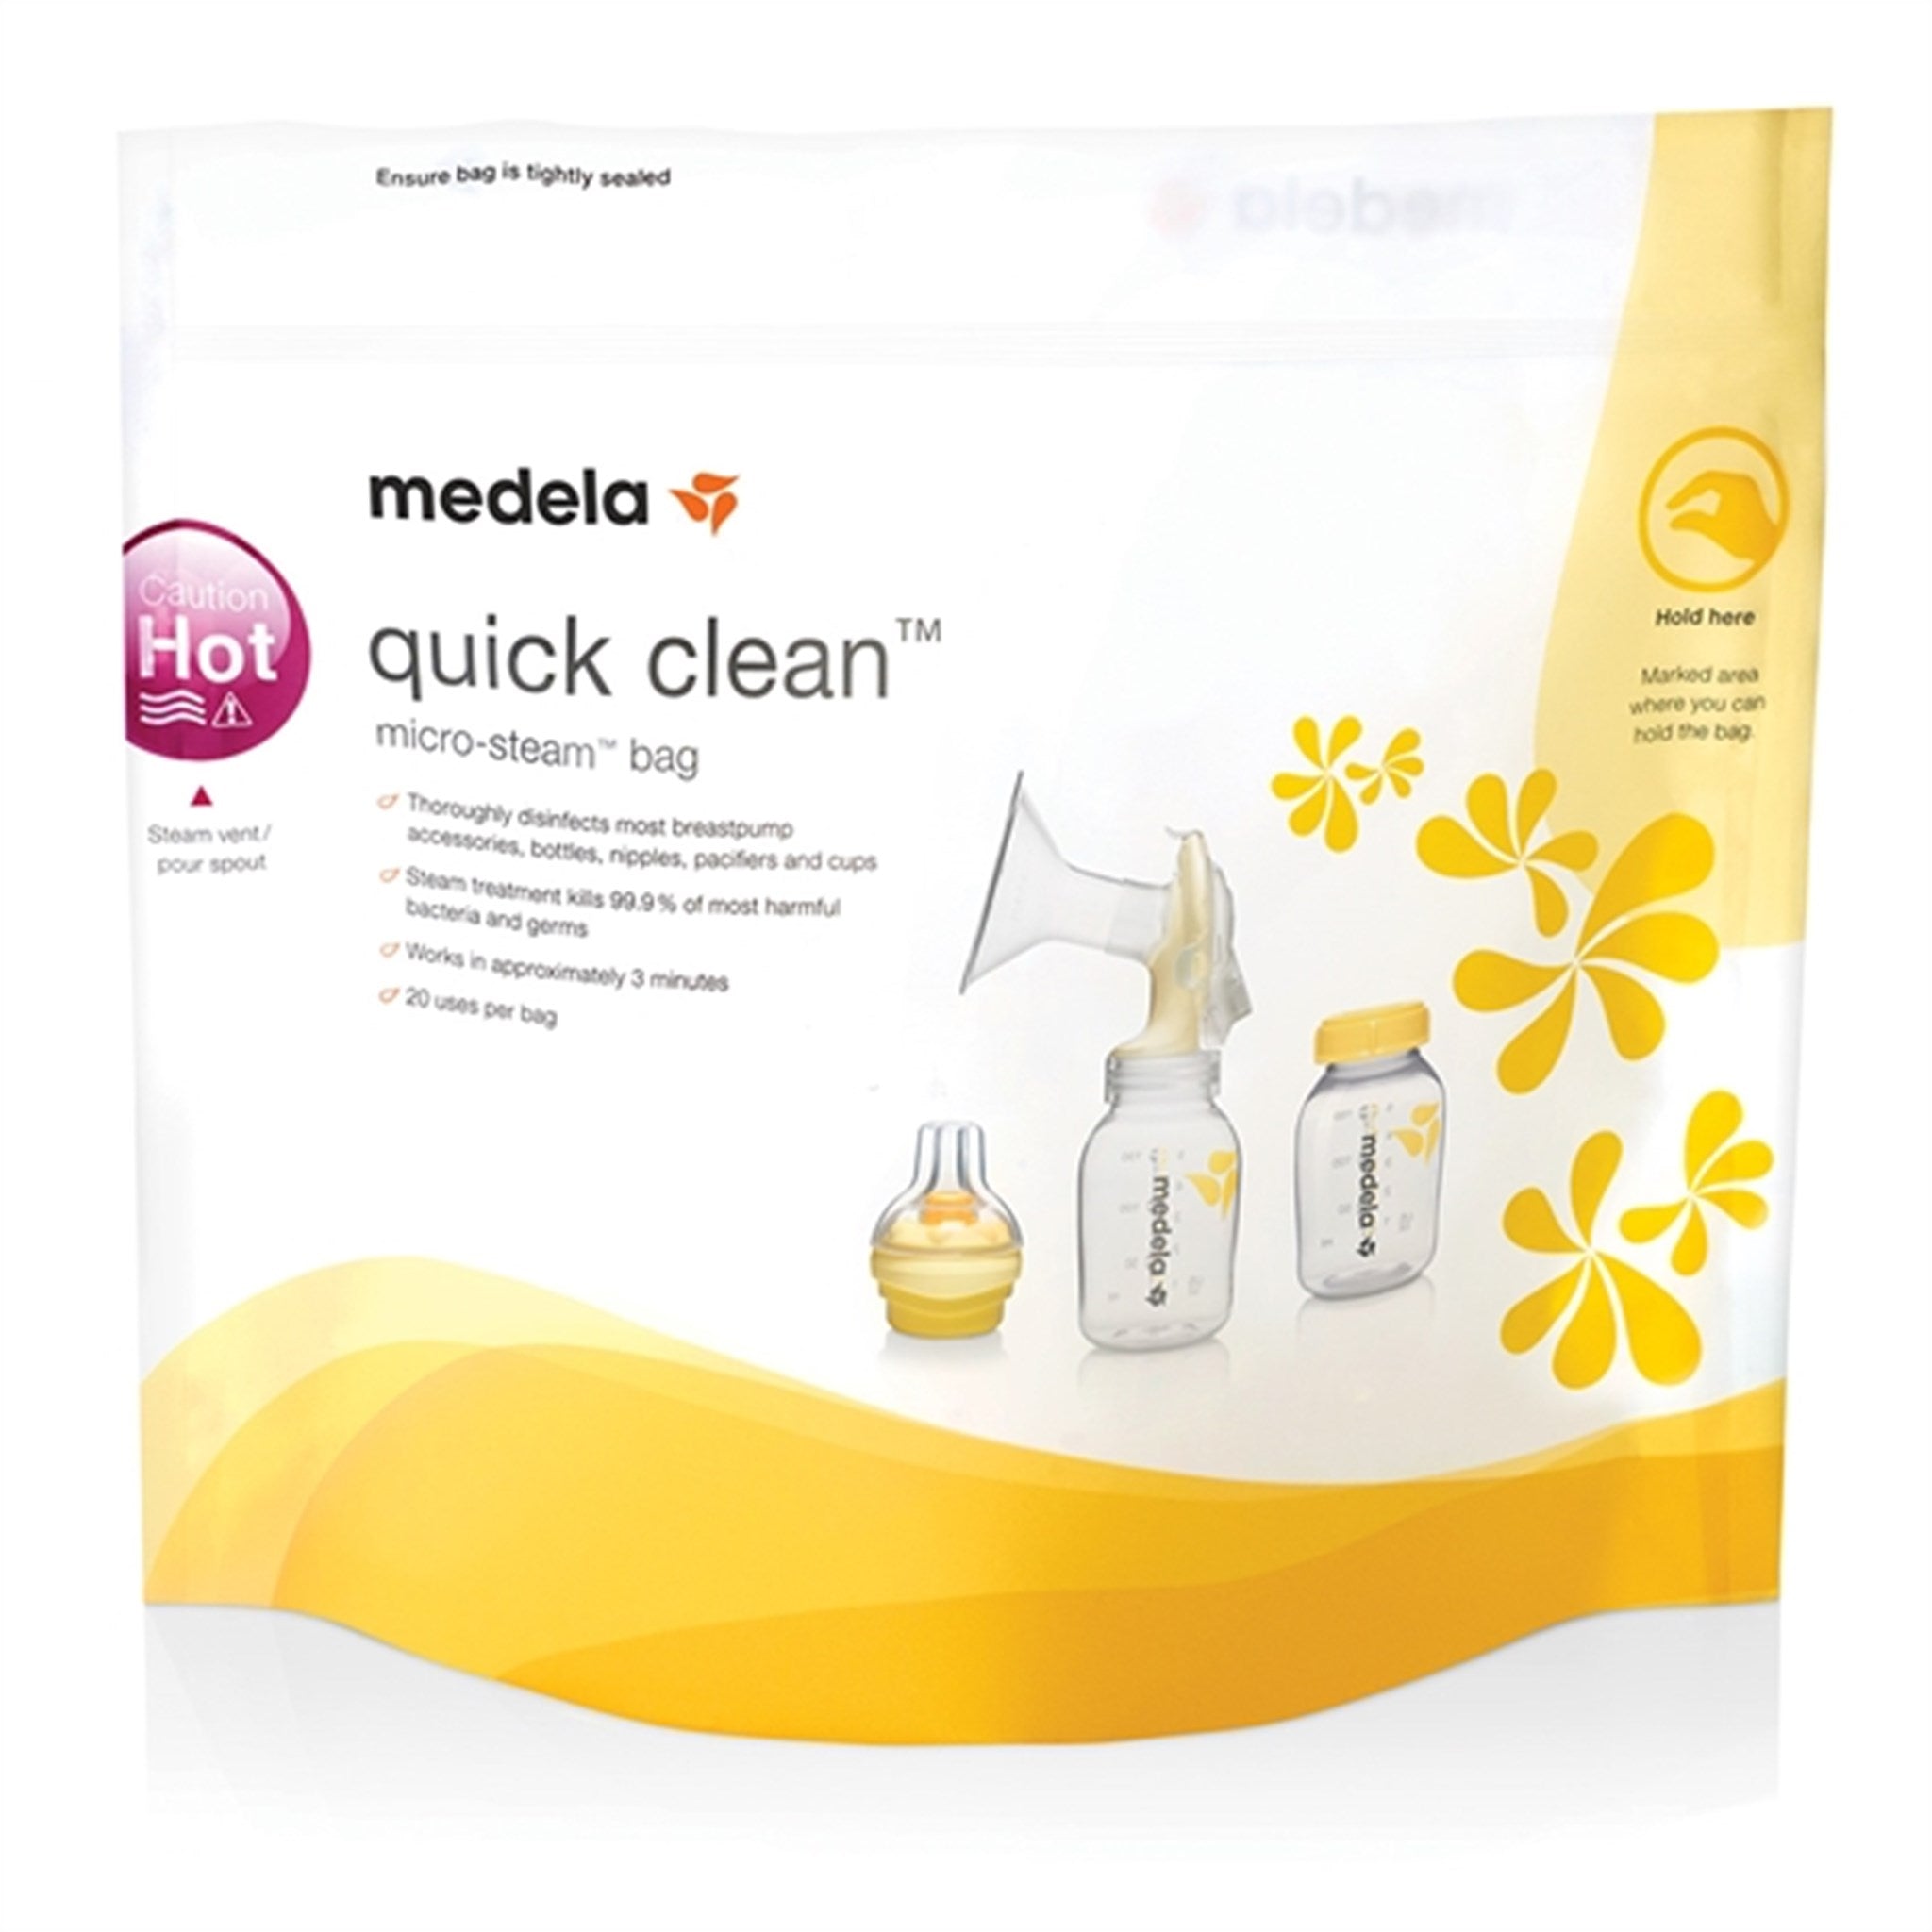 medela Quick Clean Bags For Microwave, 5 pcs. 4